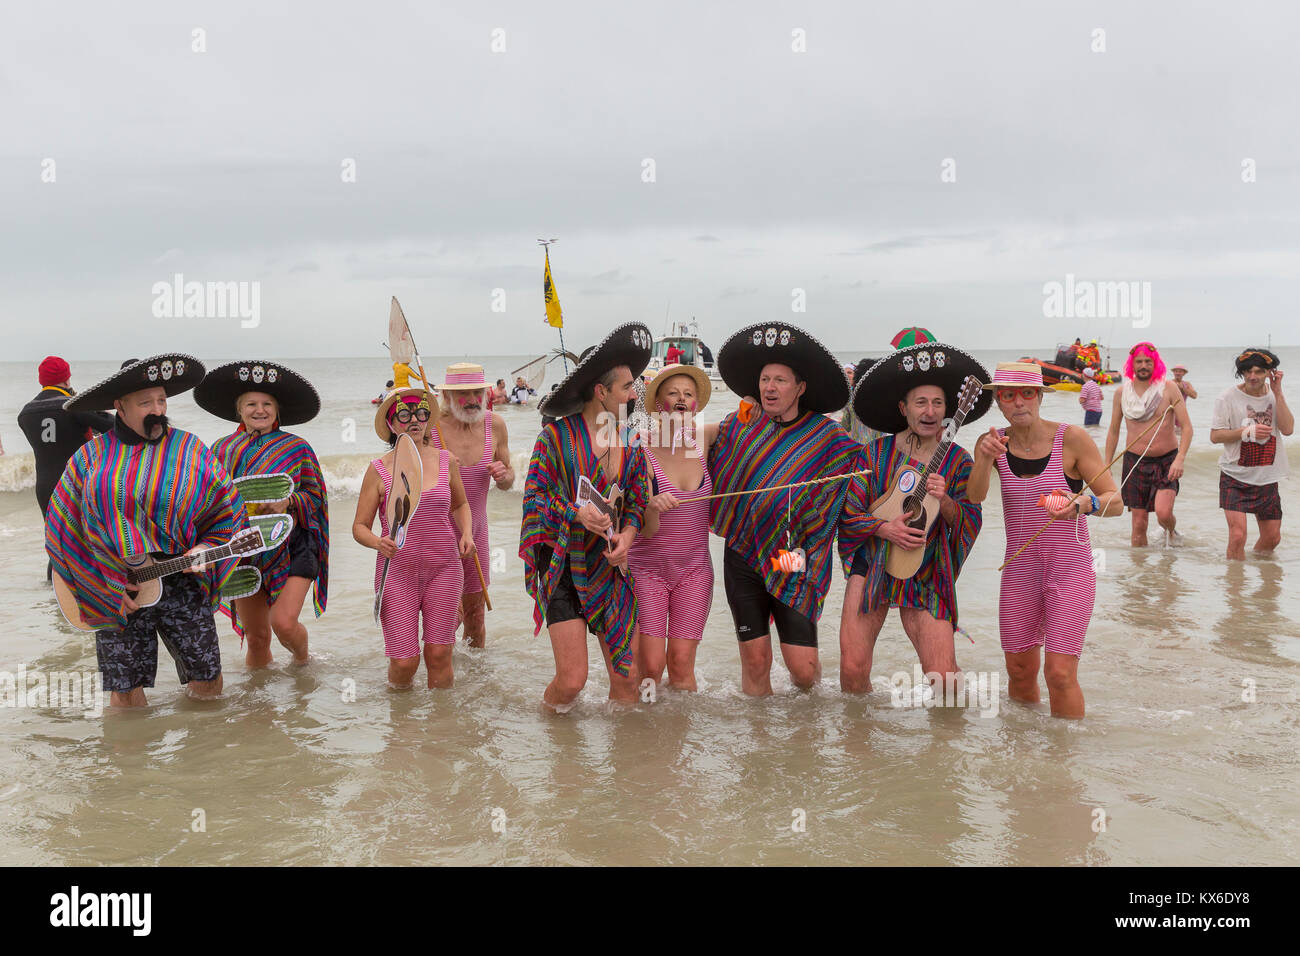 People taking part in the traditional 'Bain de Givres' as part of the New Year's celebrations on January 1, 2018 at Malo-Les-Bains beach in Dunkirk Stock Photo